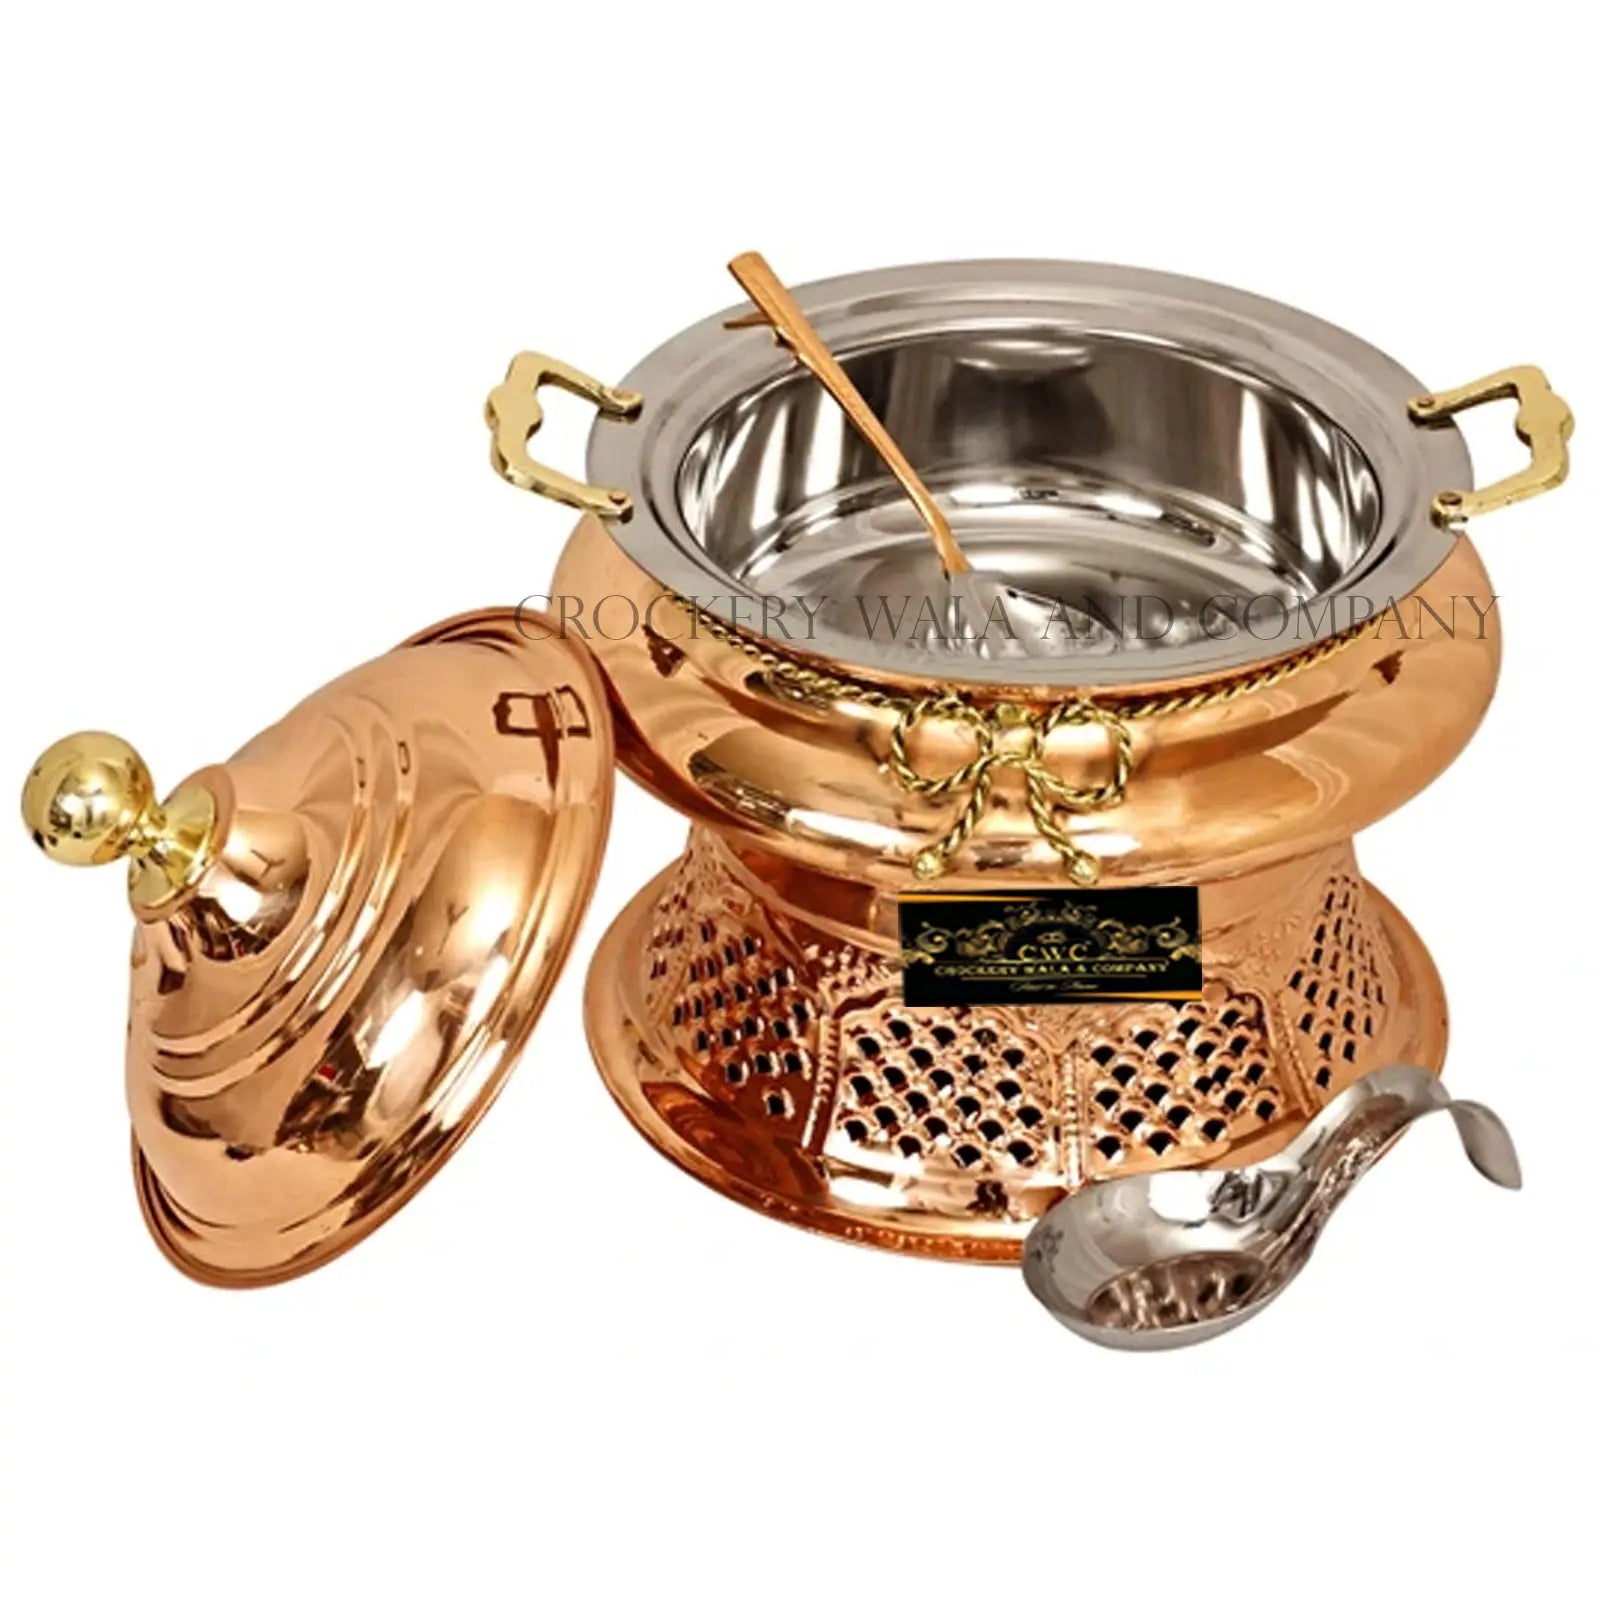 Crockery Wala And Company Copper Steel Chaffing Dish With Stand & Copper Steel Spoon 4 Liters - CROCKERY WALA AND COMPANY 